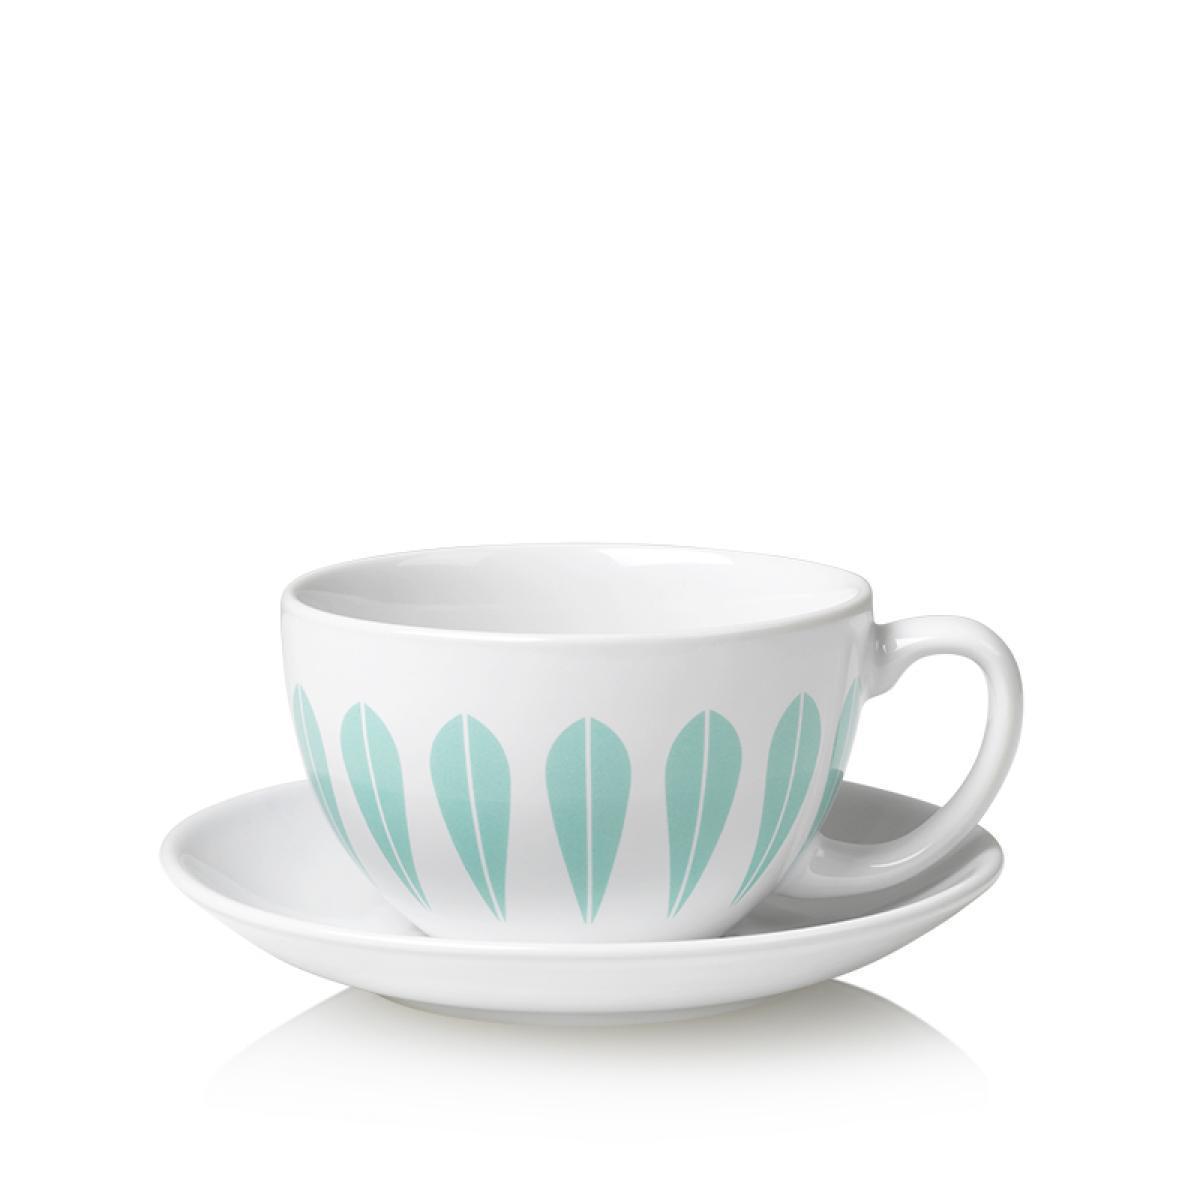 Lucie Kaas Arne Clausen Collection Cups With Saucer Mint Green, 10 cm